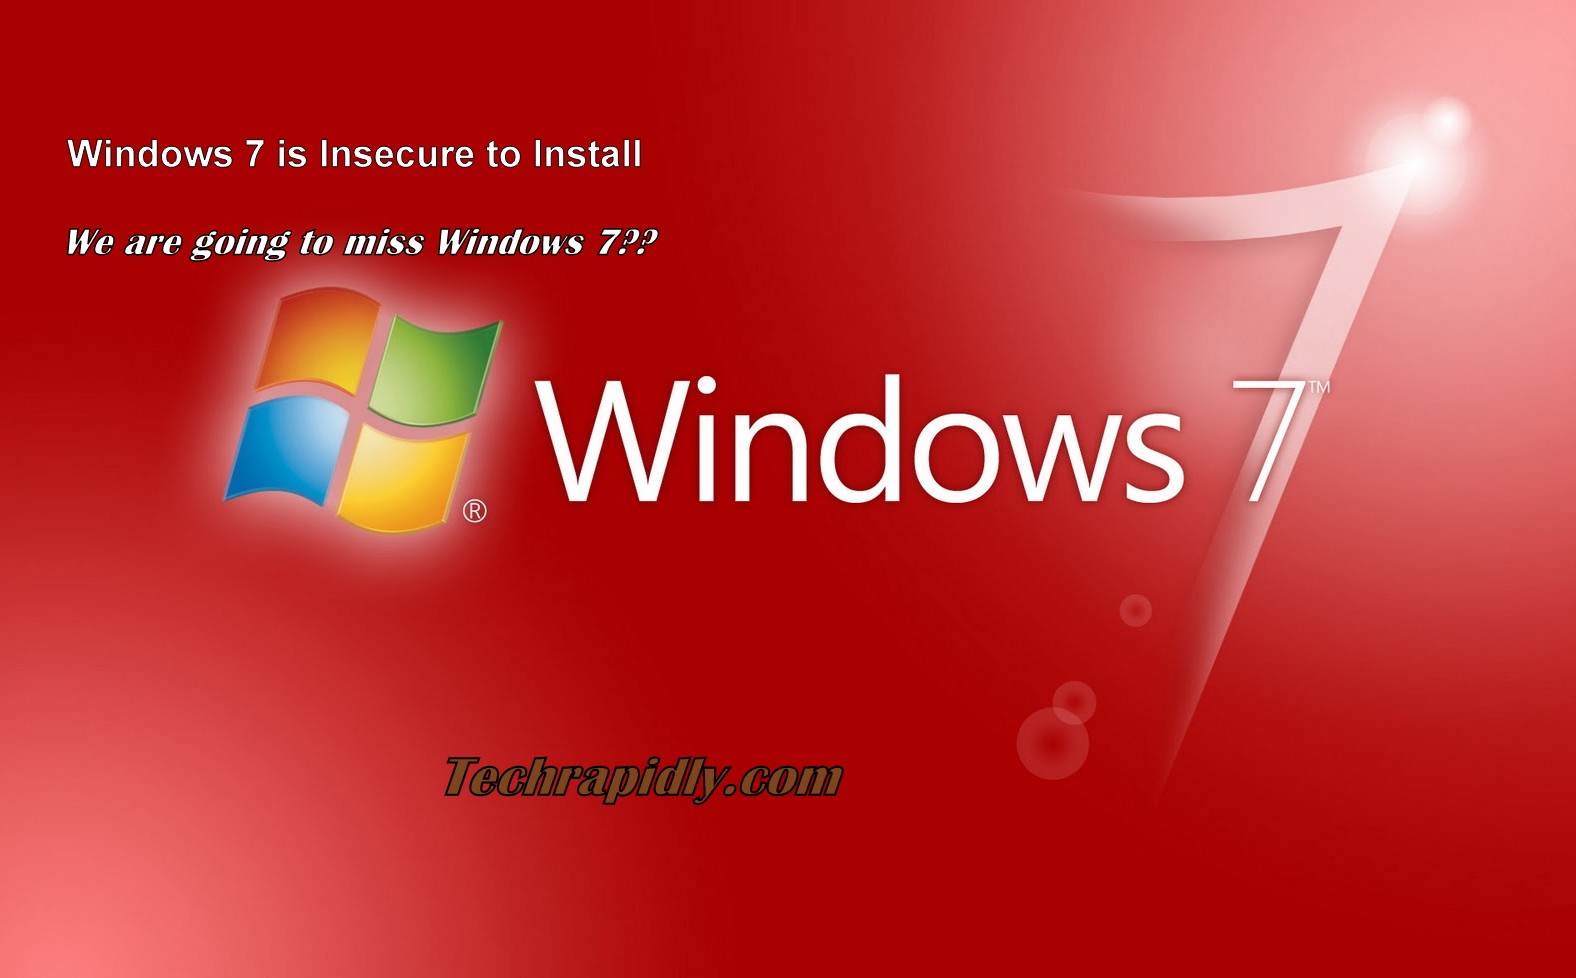 Windows 7 is Insecure and dangerous to Install